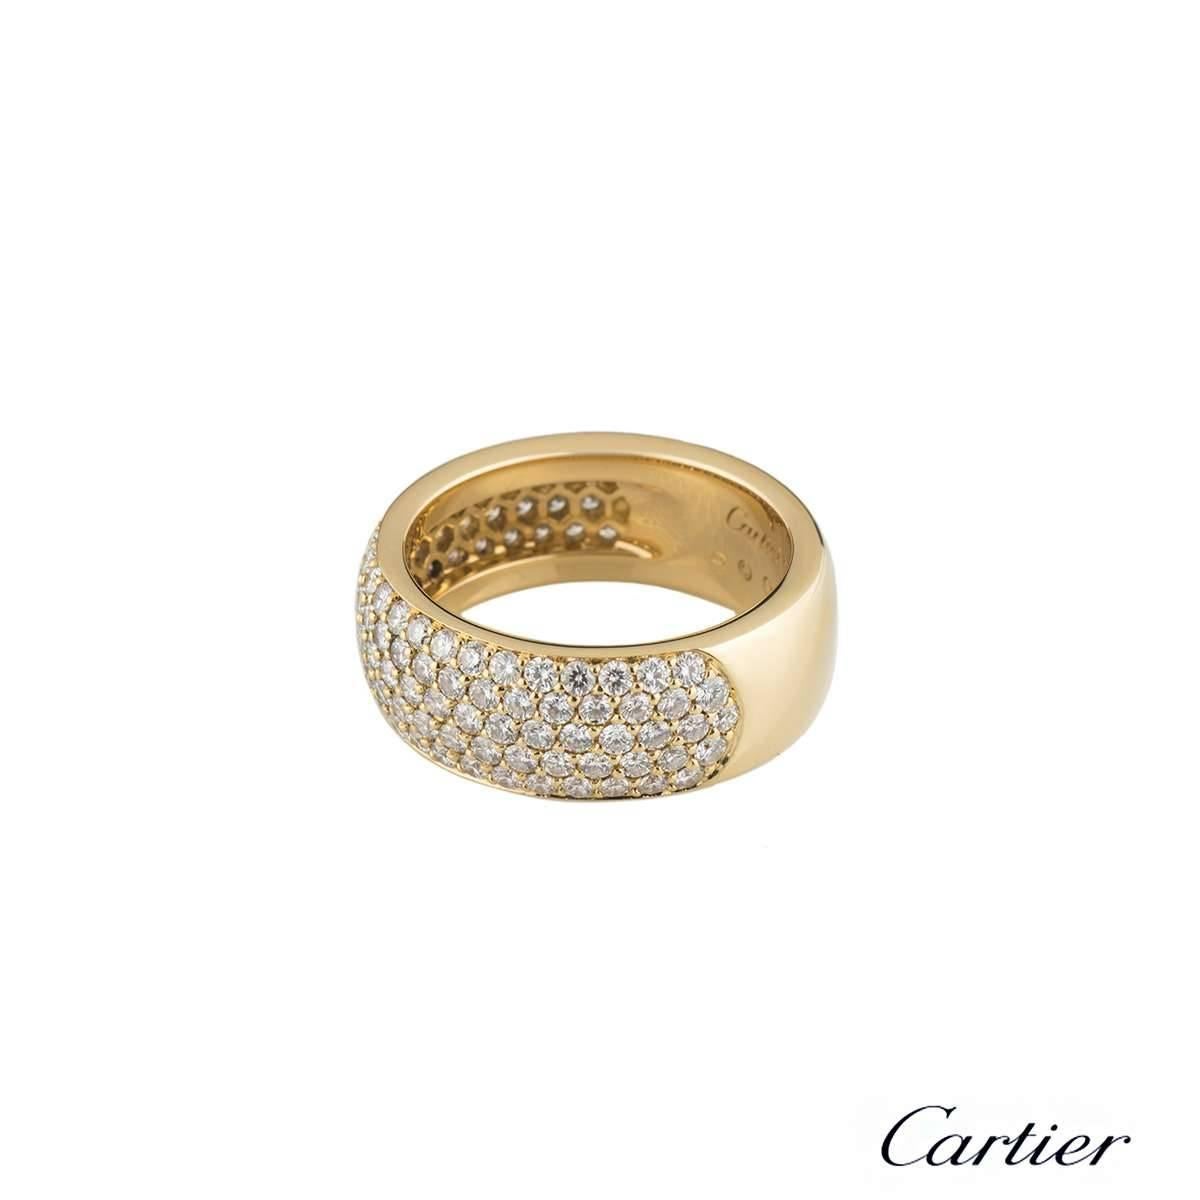 A stunning 18k yellow gold diamond dress ring by Cartier. The ring is set to the front with approximately 118 round brilliant cut pave set diamonds, totalling approximately 2.36ct. The diamonds are predominantly F colour and VS in clarity. The 8mm